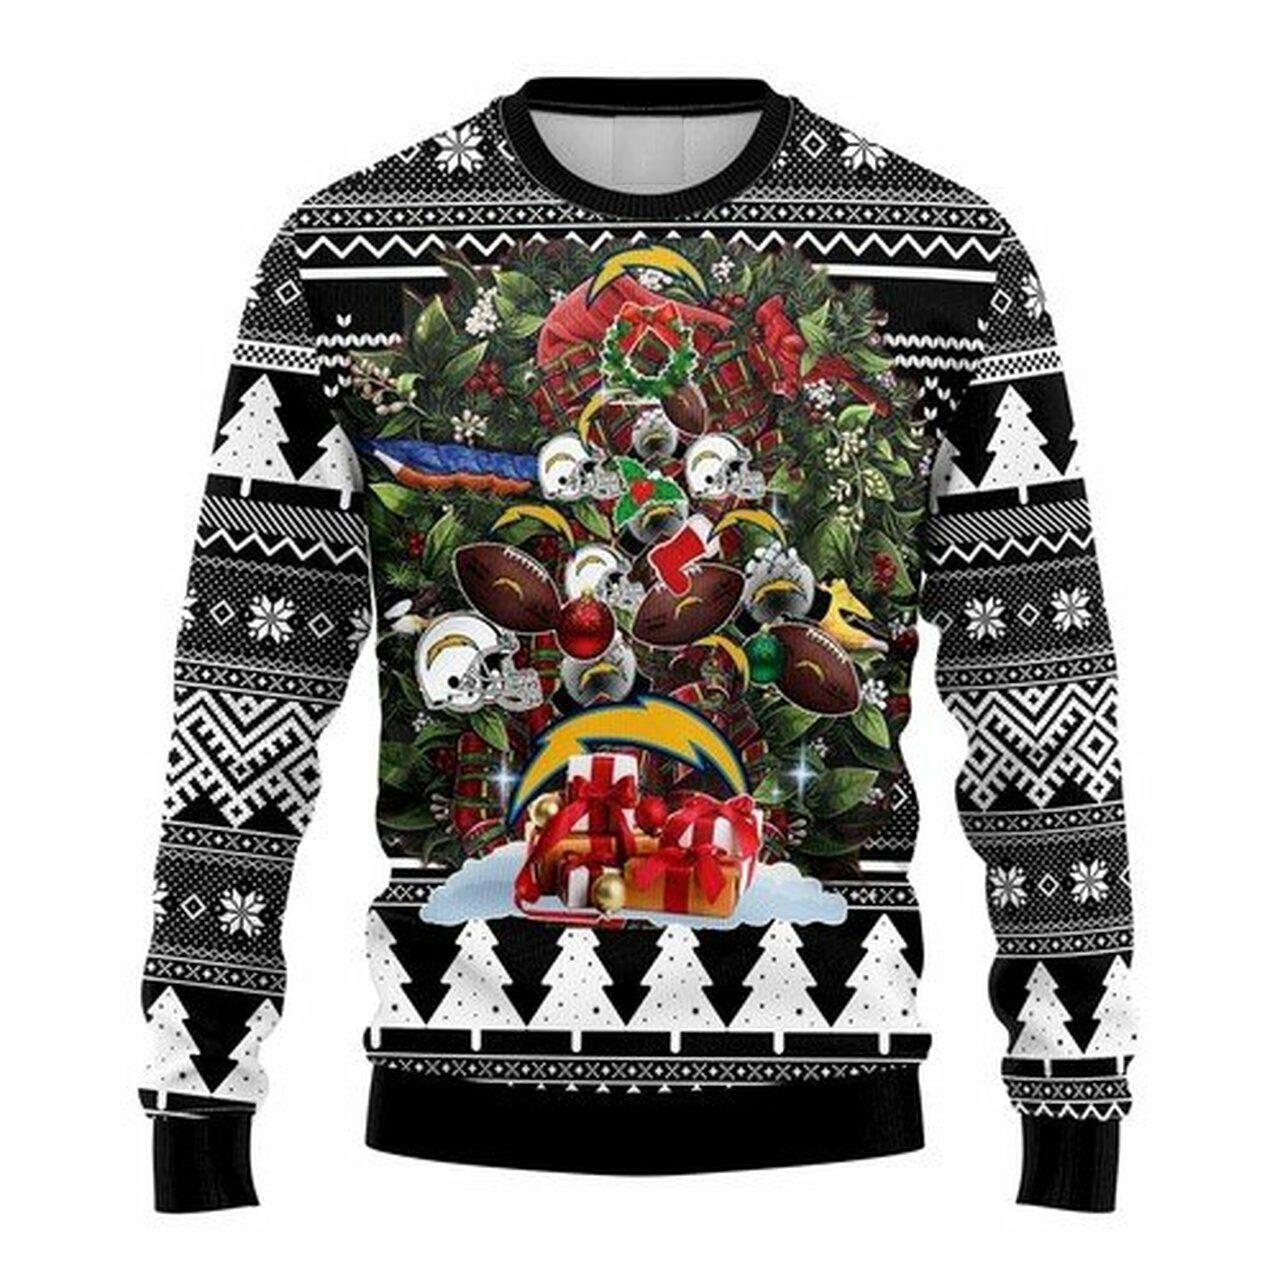 NFL San Diego Chargers christmas tree ugly sweater